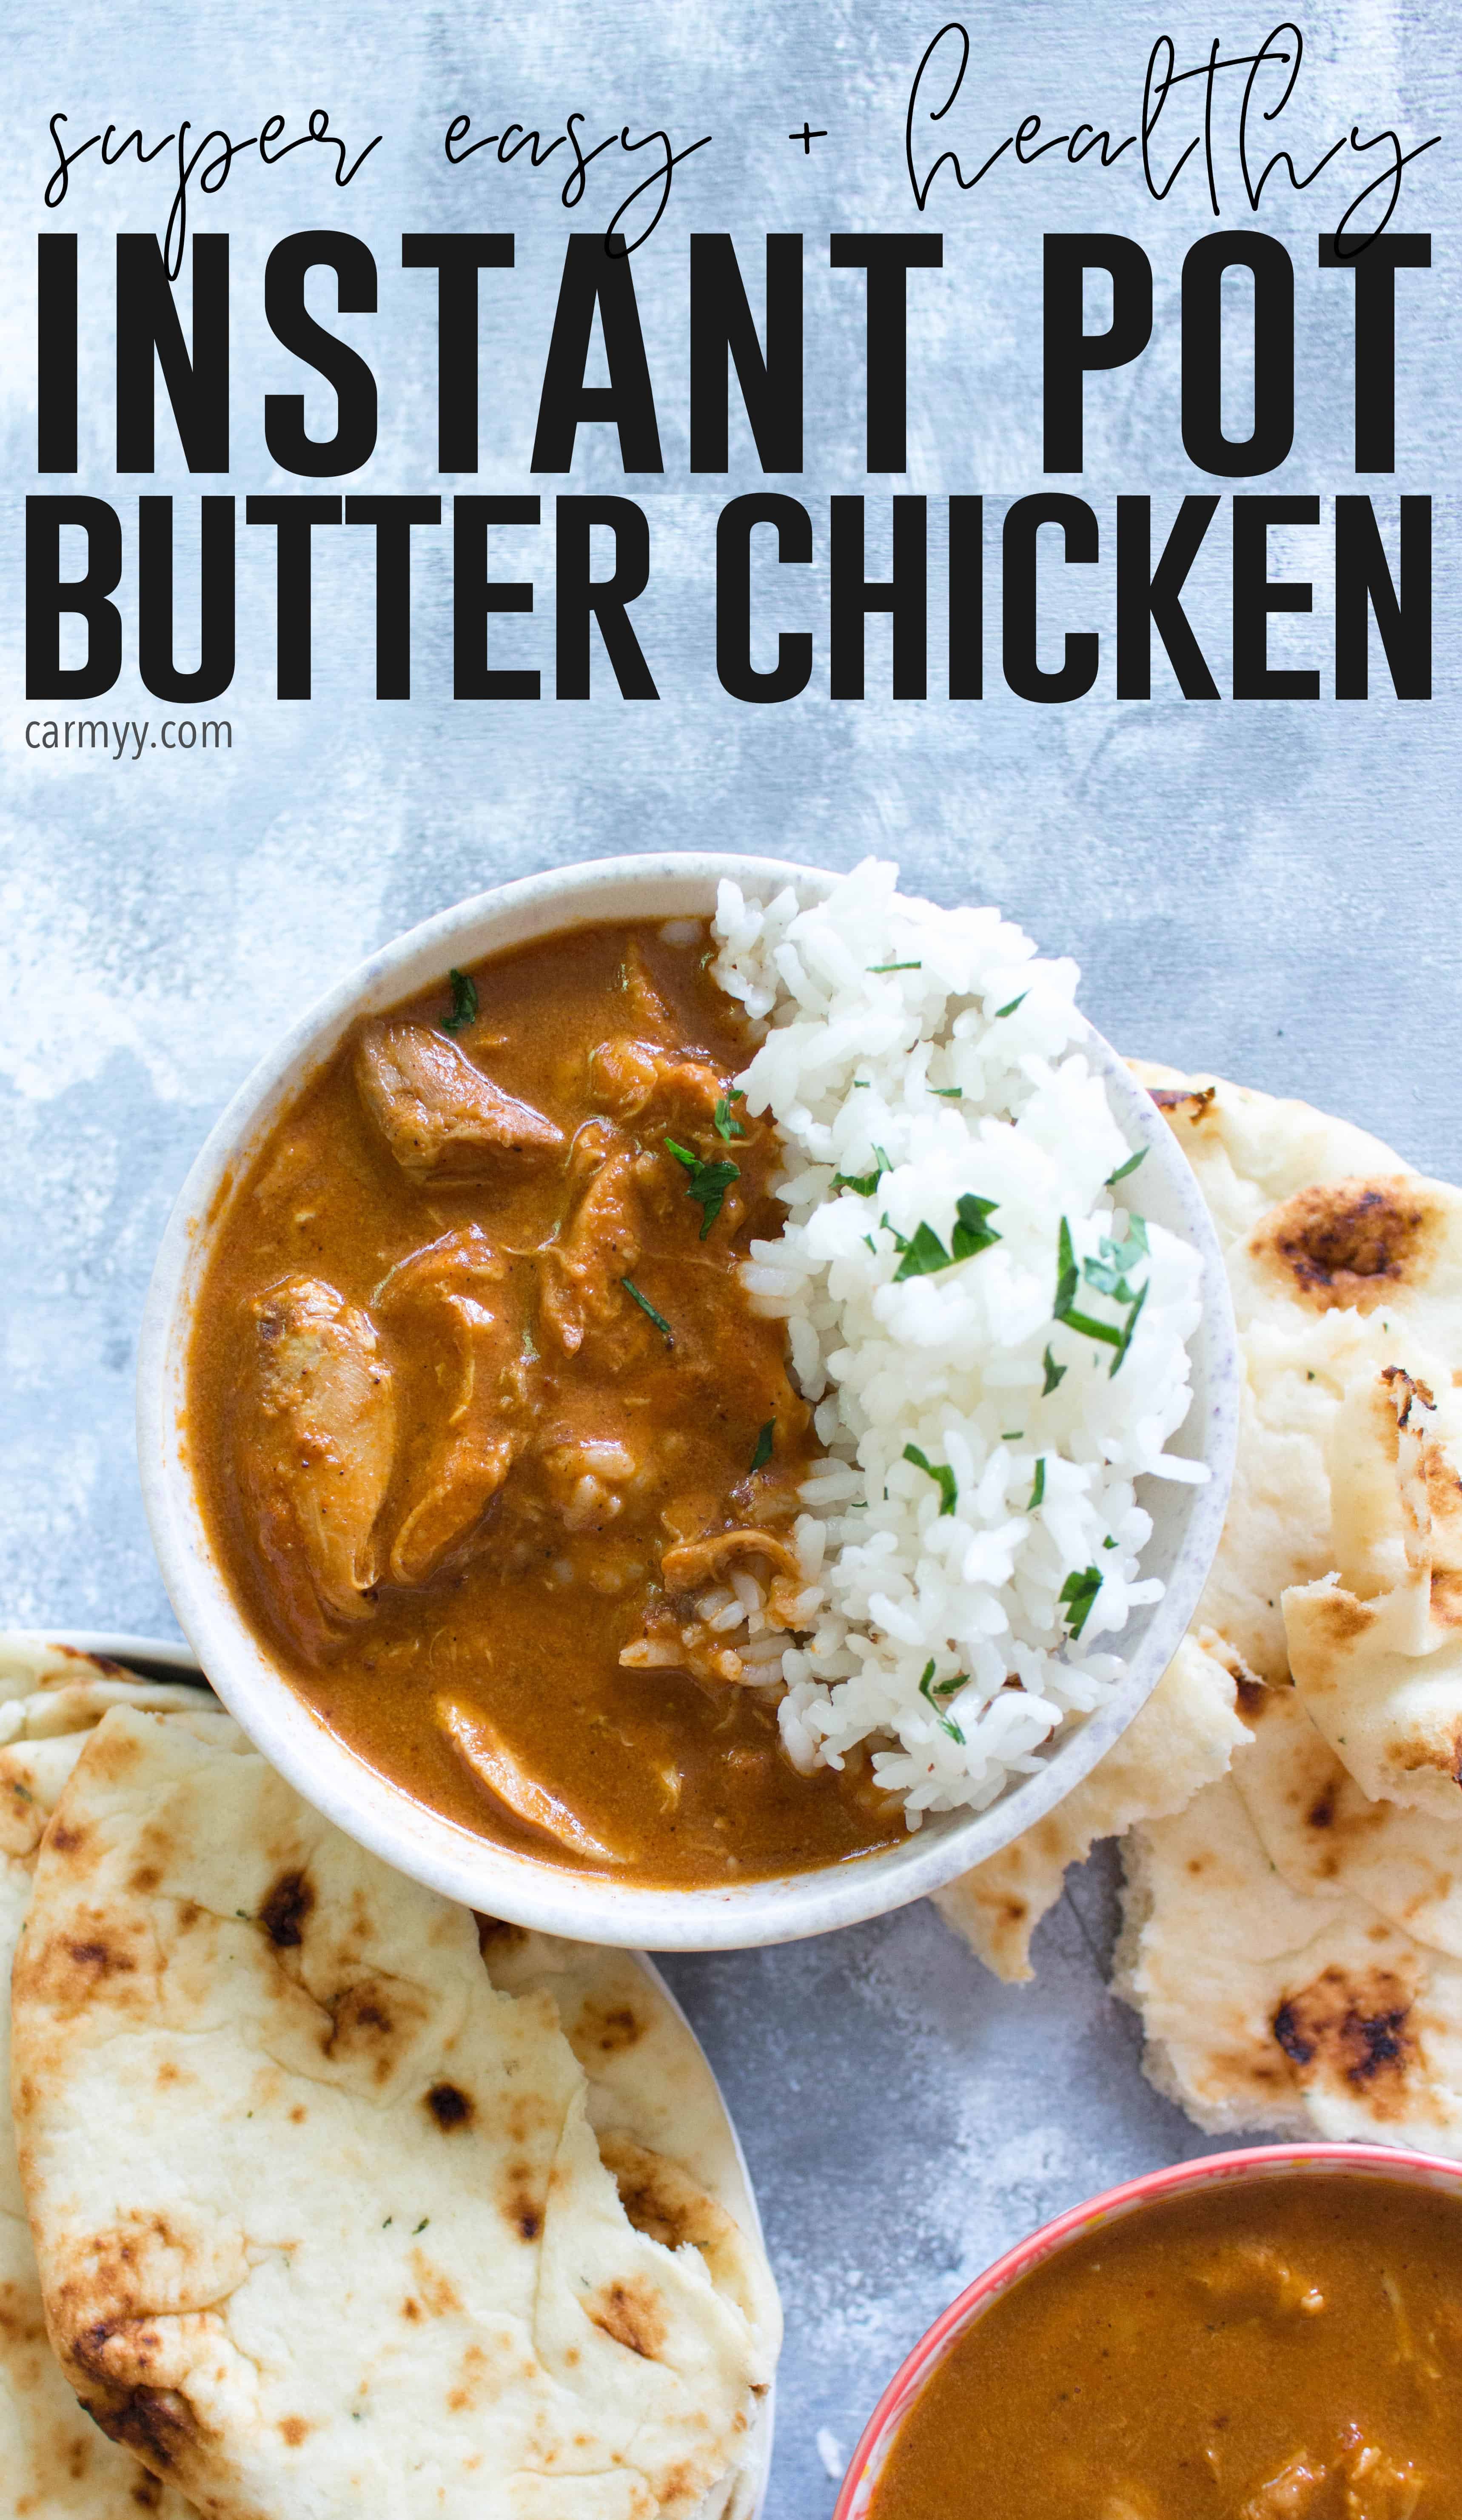 Healthy Instant Pot Butter Chicken - Carmy - Run Eat Travel